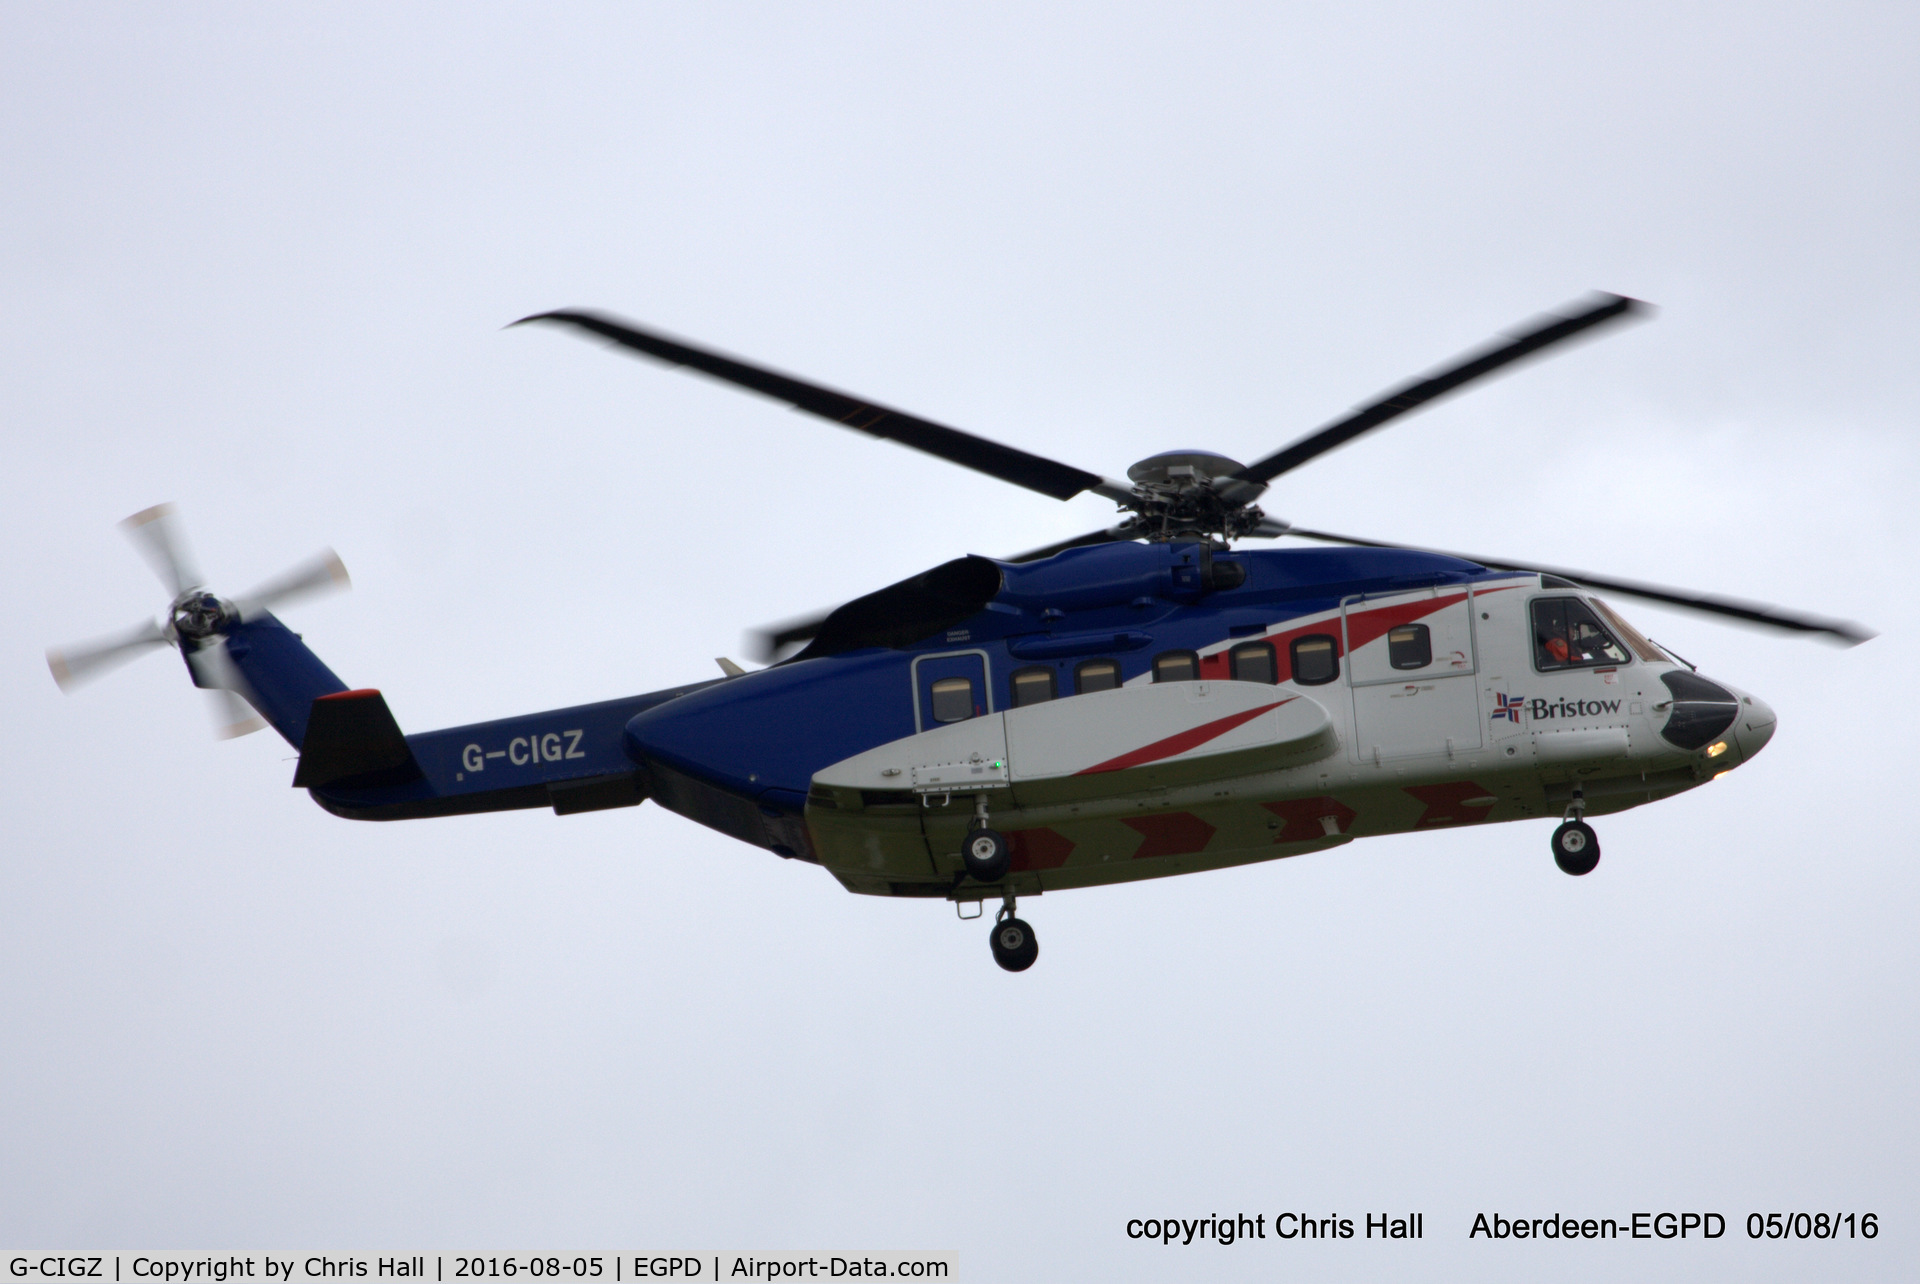 G-CIGZ, 2013 Sikorsky S-92A C/N 920224, Bristow Helicopters